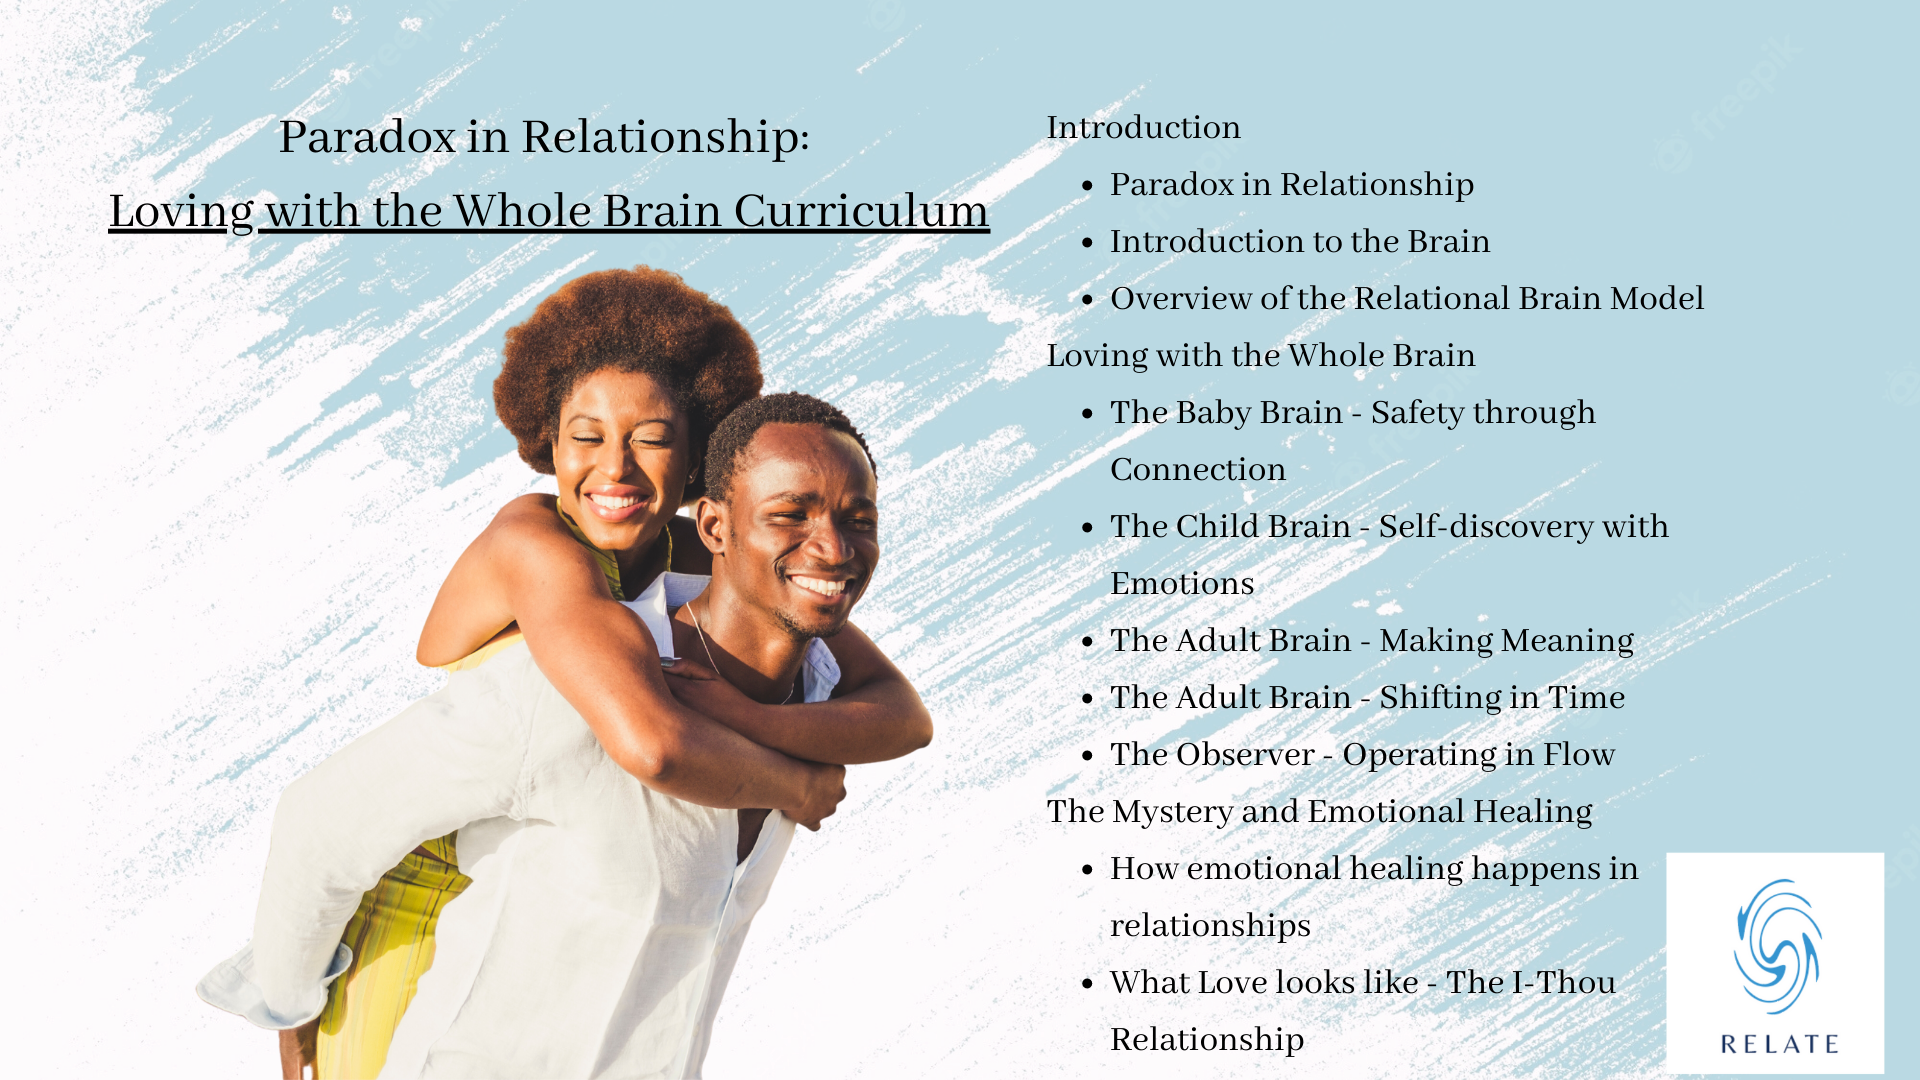 Paradox in Relationship: Loving with the Whole Brain